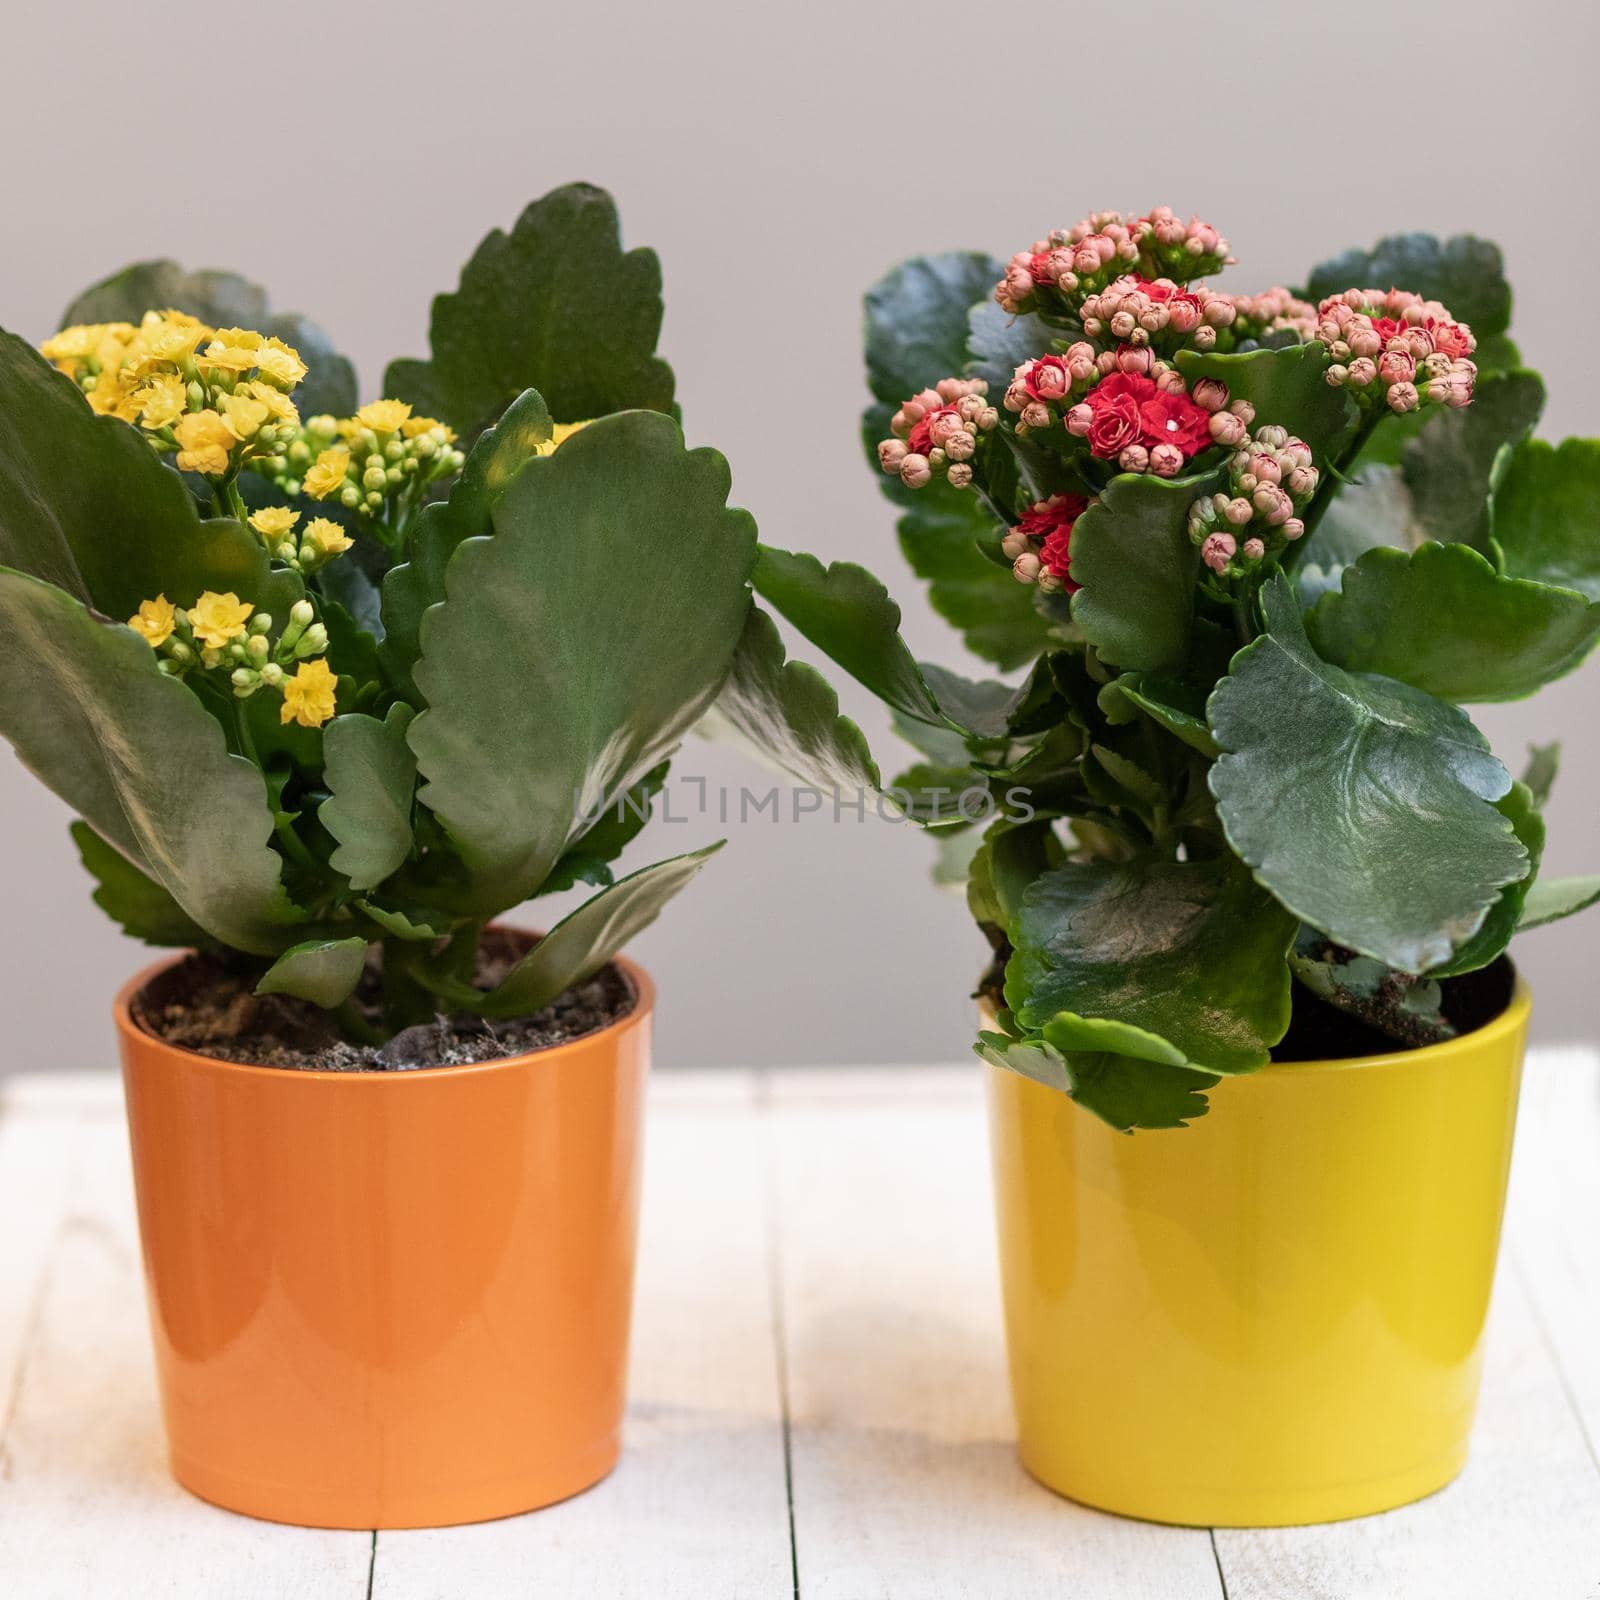 Colorful Widow's-thrill, Kalanchoe flowers